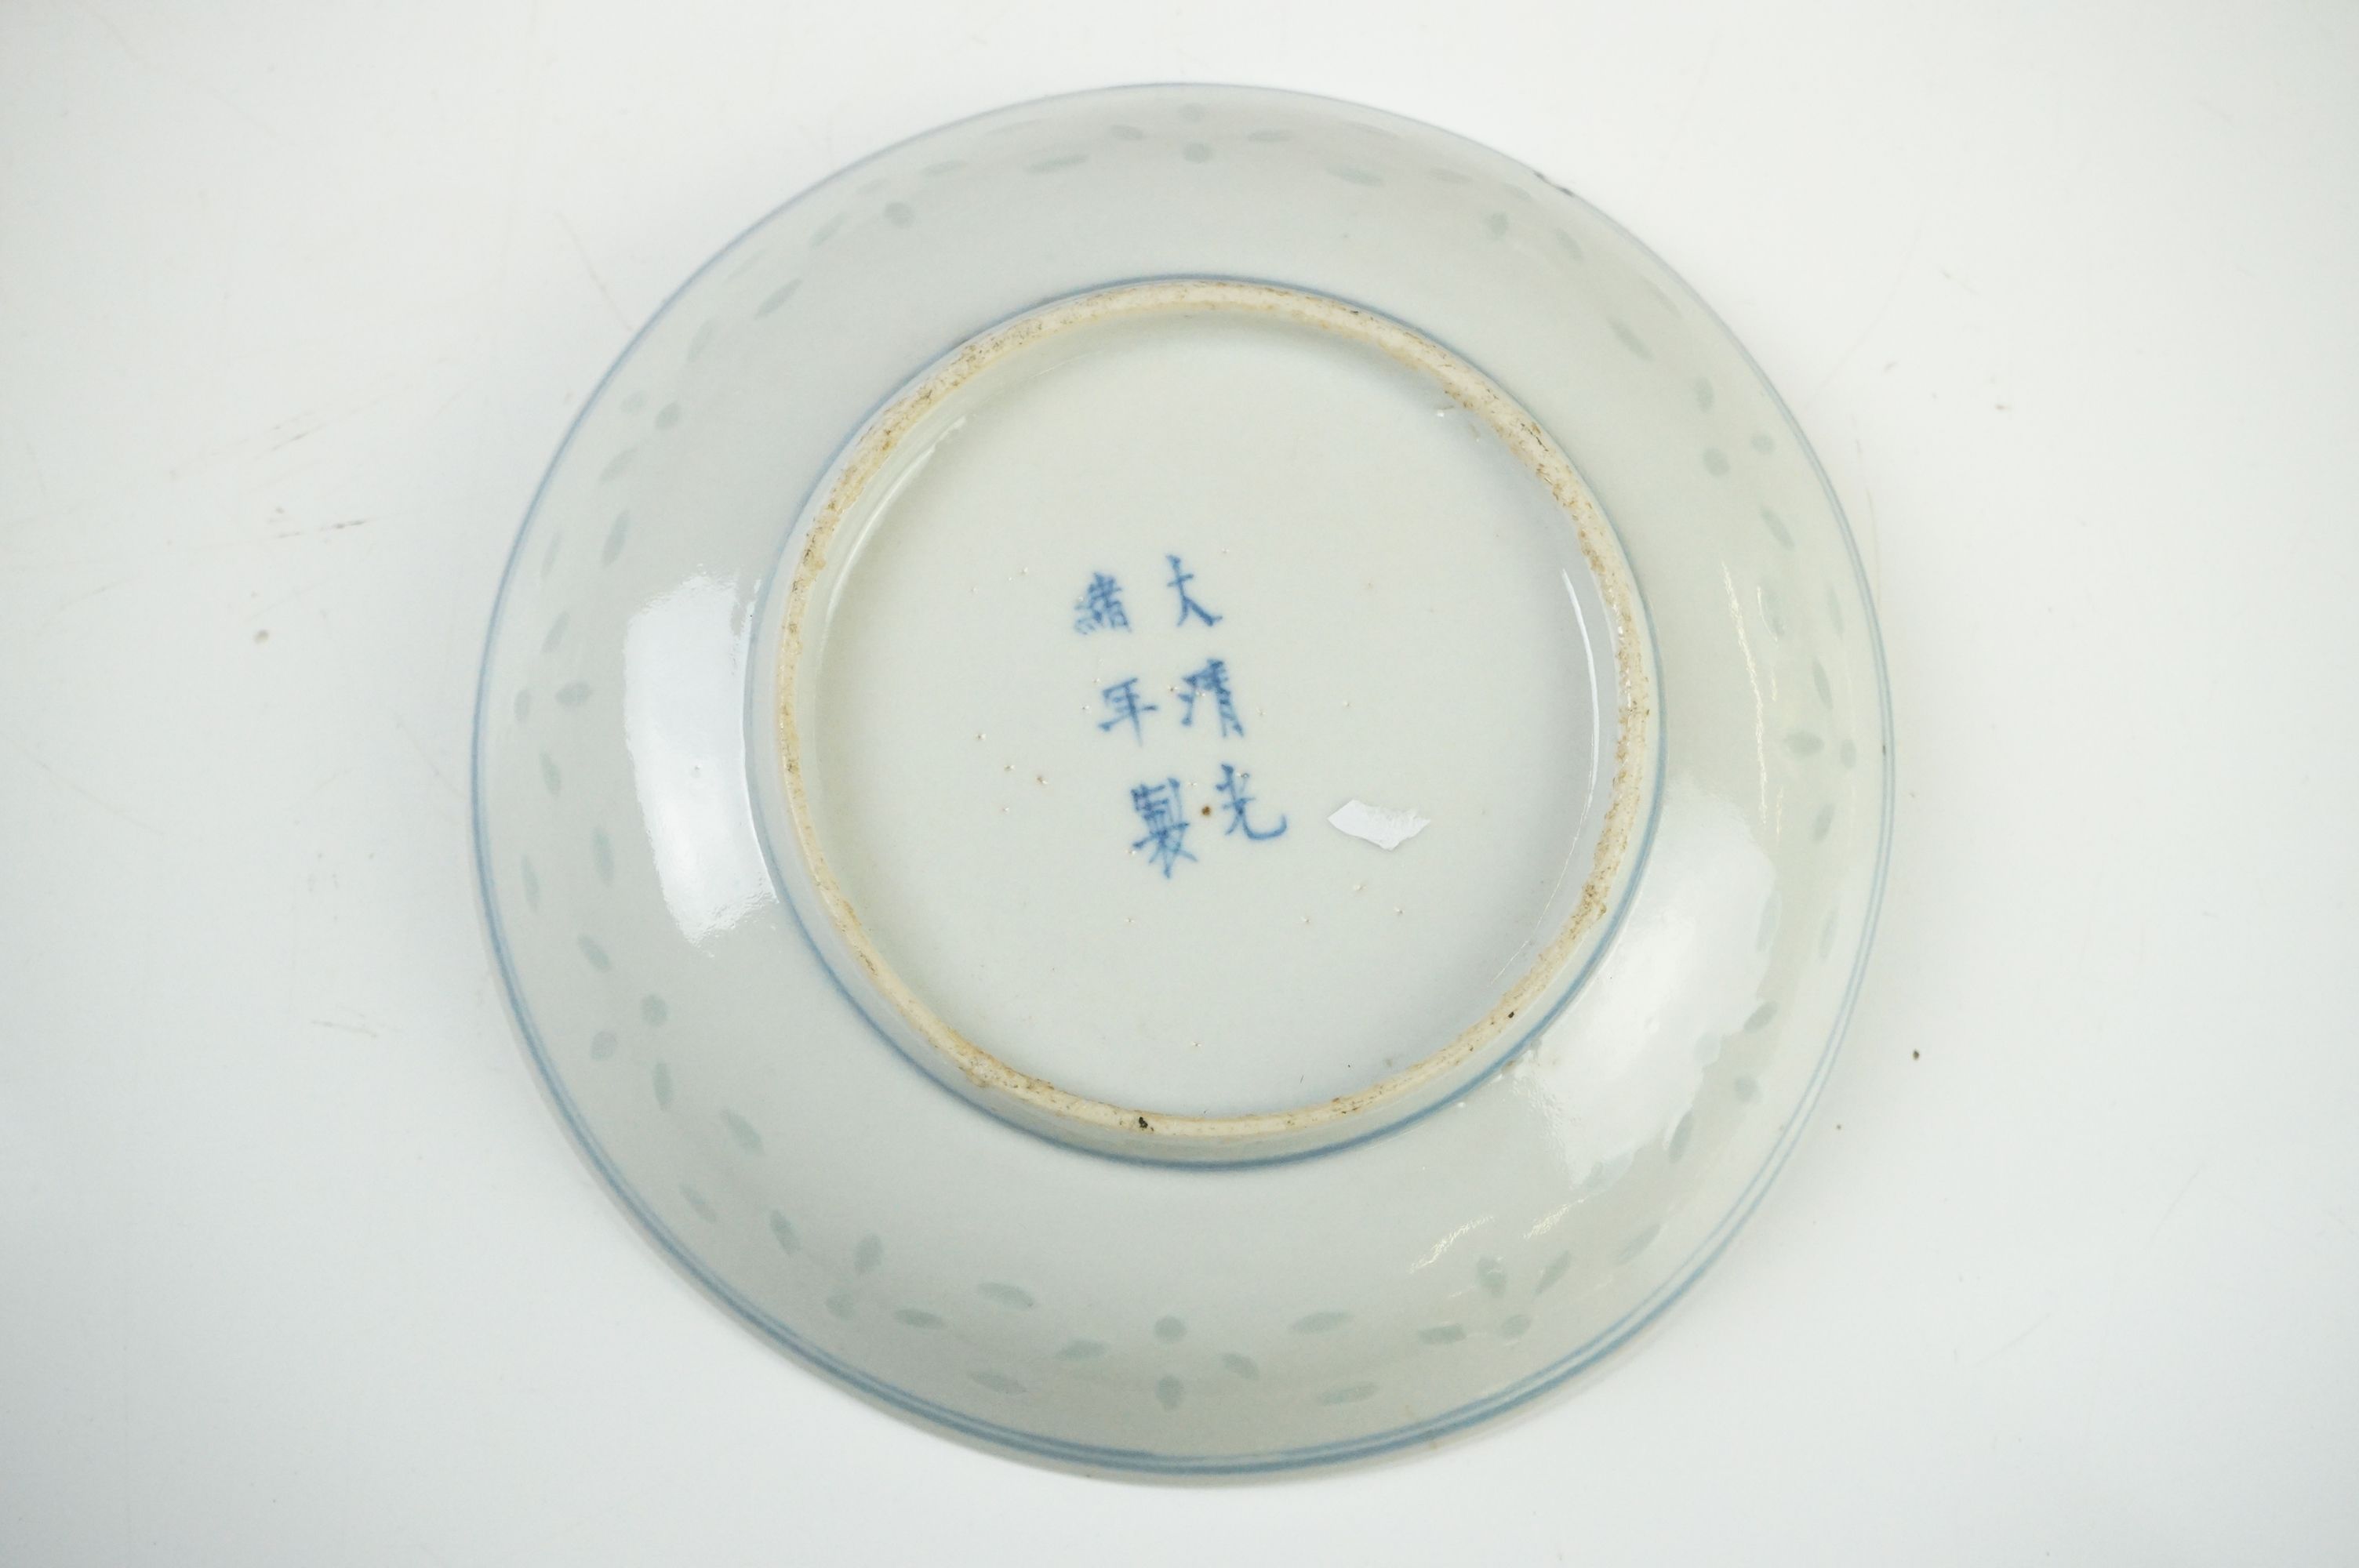 Collection of Chinese Tea Bowls, Cups and Saucers, 18th century onwards, mainly famille rose and - Image 7 of 28